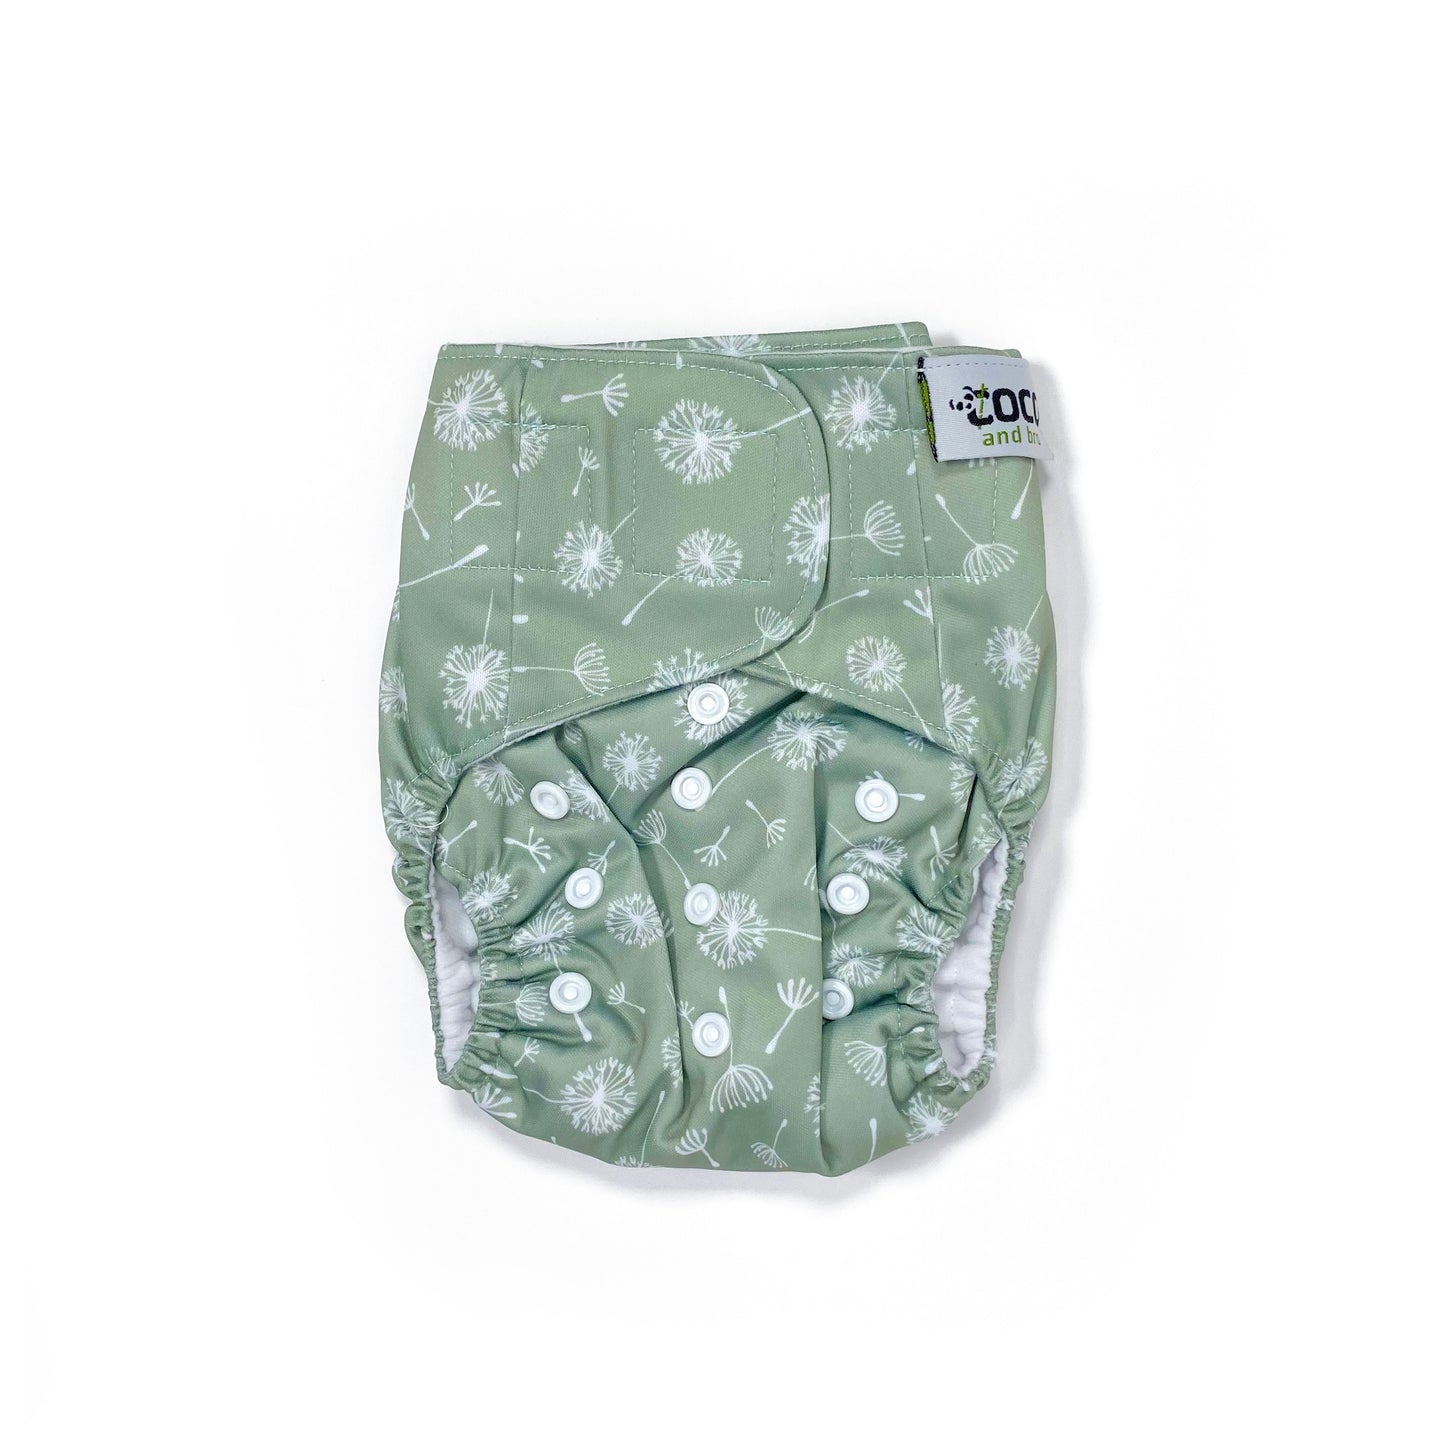 An adjustable reusable nappy for babies and toddlers, featuring a green dandelion design, with images of dandelion seeds on a green background. View shows the front of the nappy.